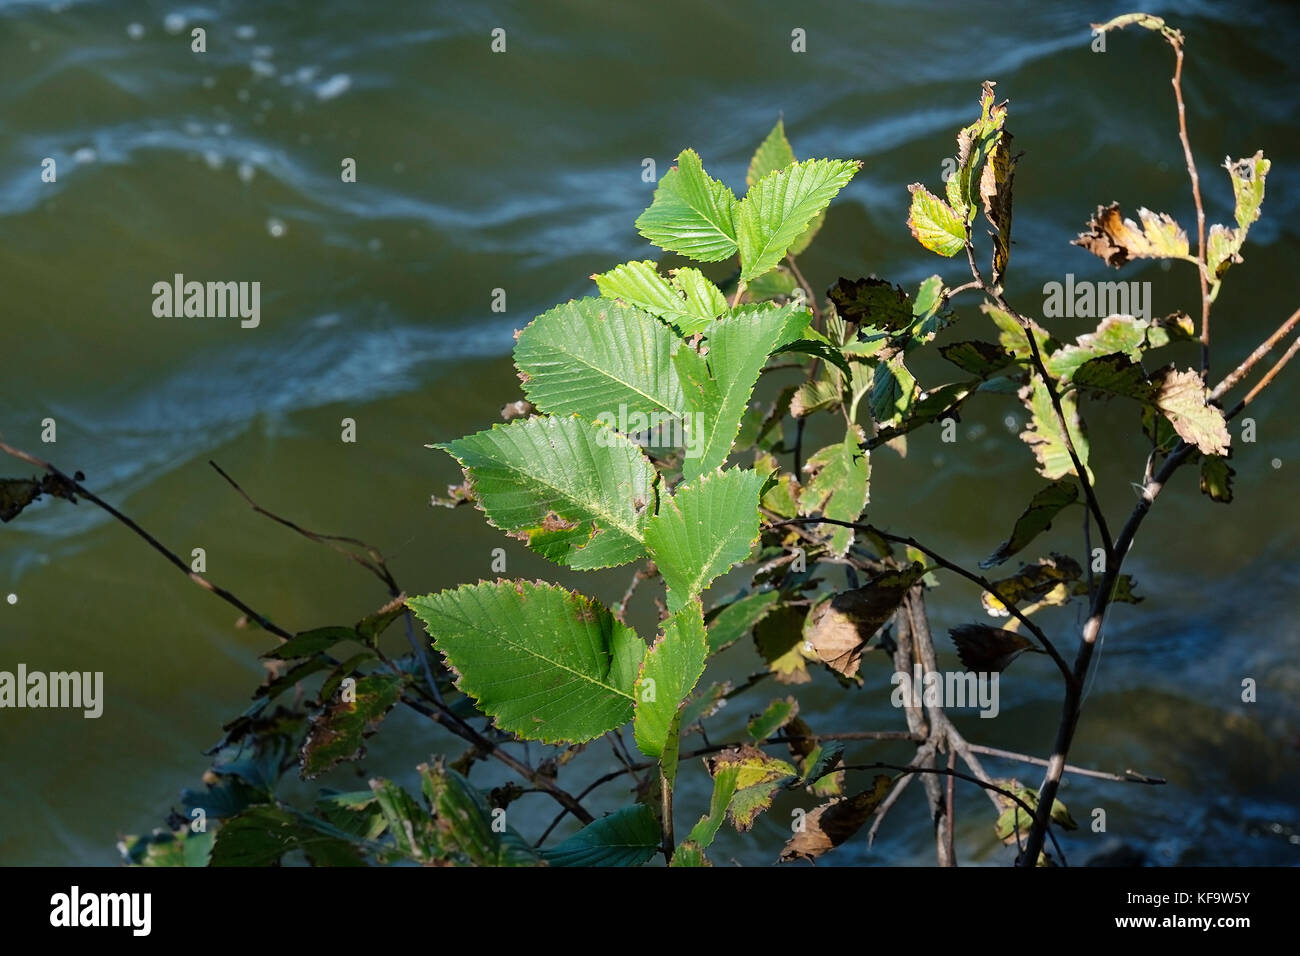 The leaves of an American Elm tree, Ulmus americana, a small tree just beginning to take hold at the edge of a lake. Oklahoma, USA. Stock Photo